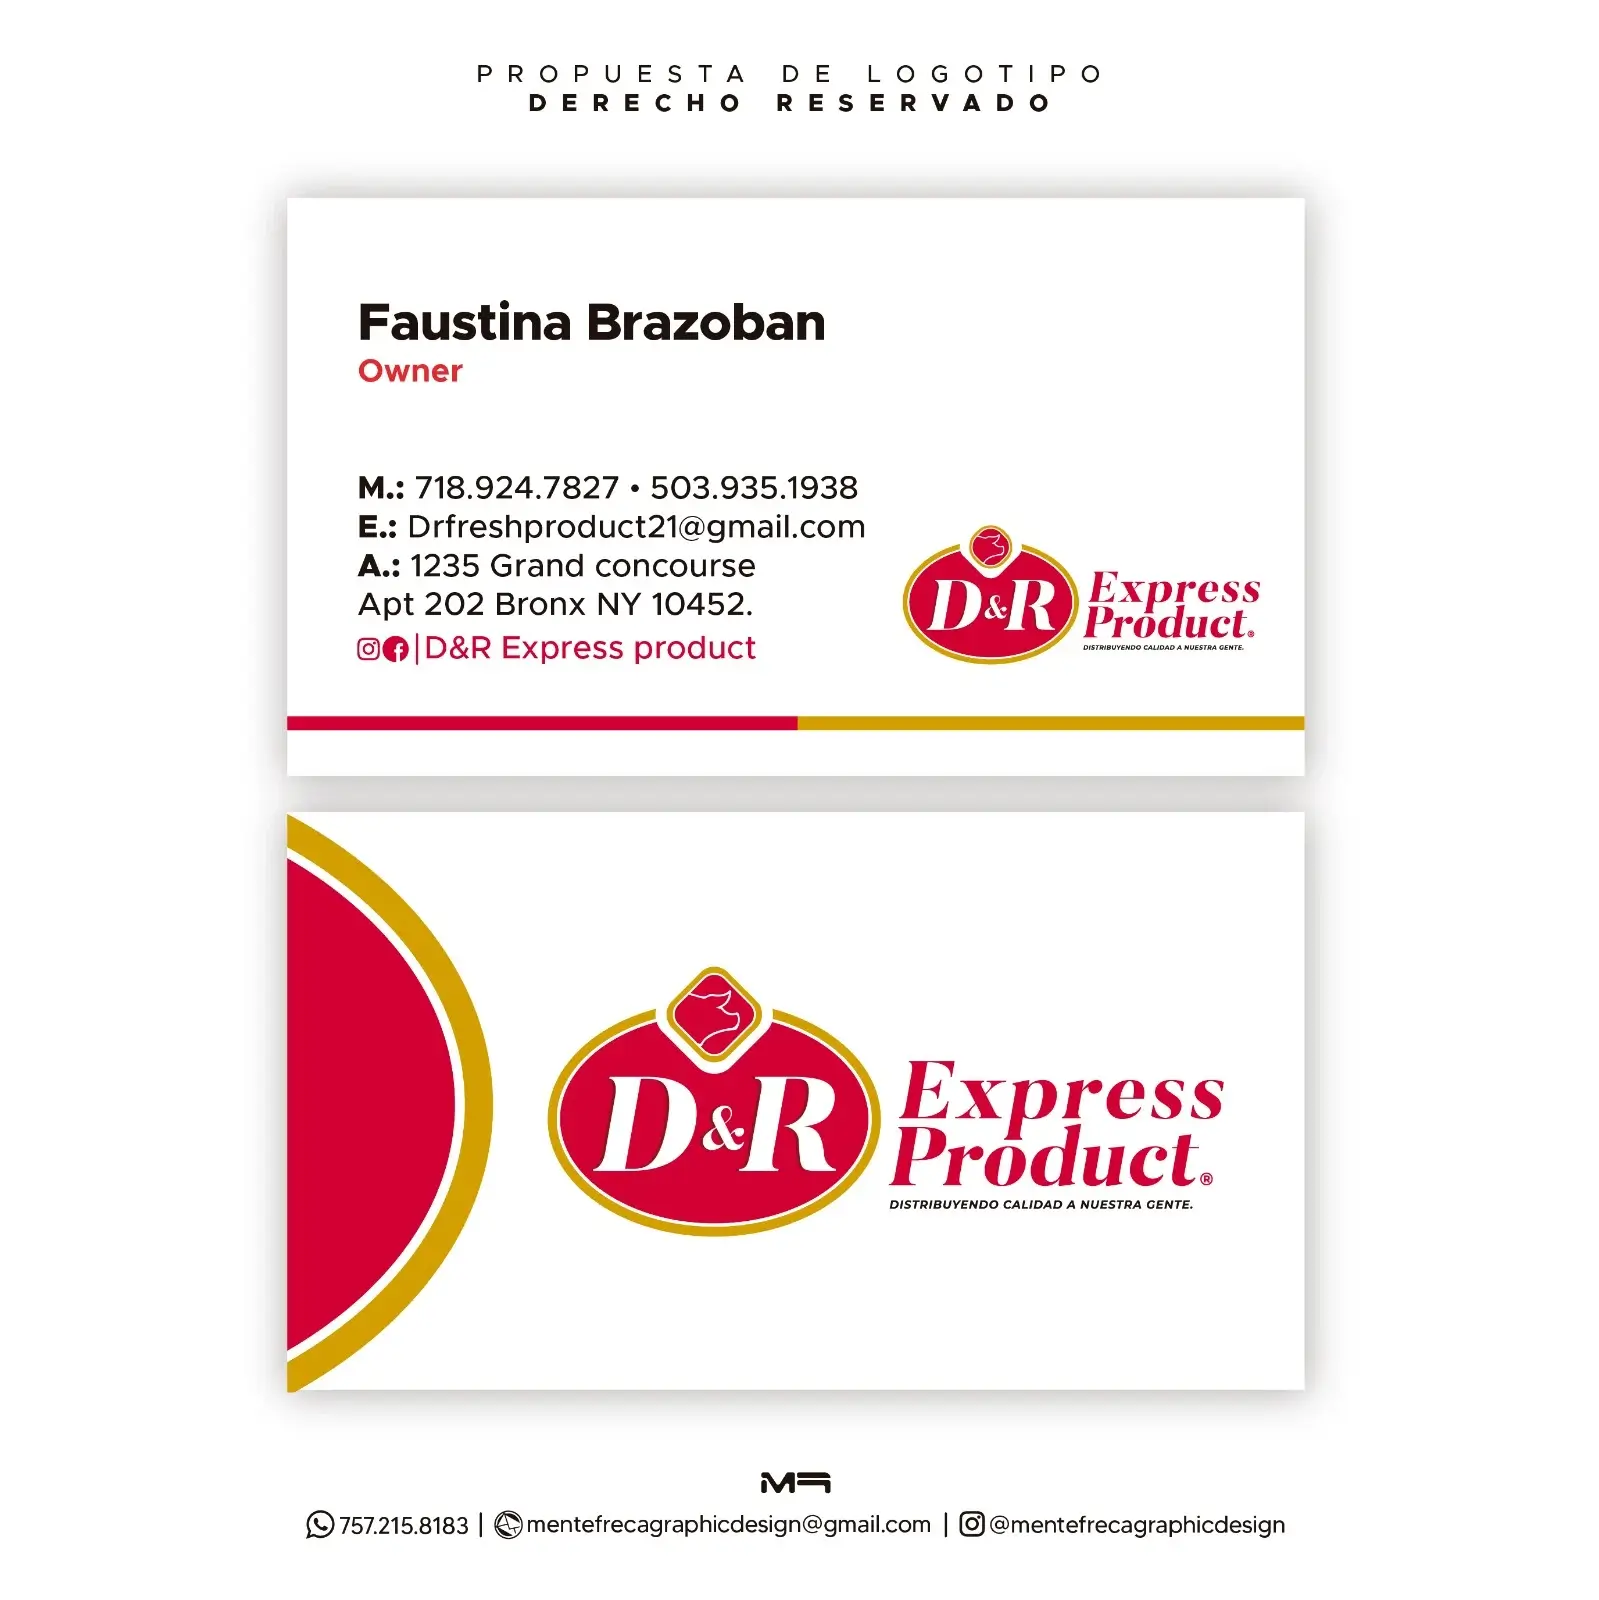 D&R Express Product Business Card